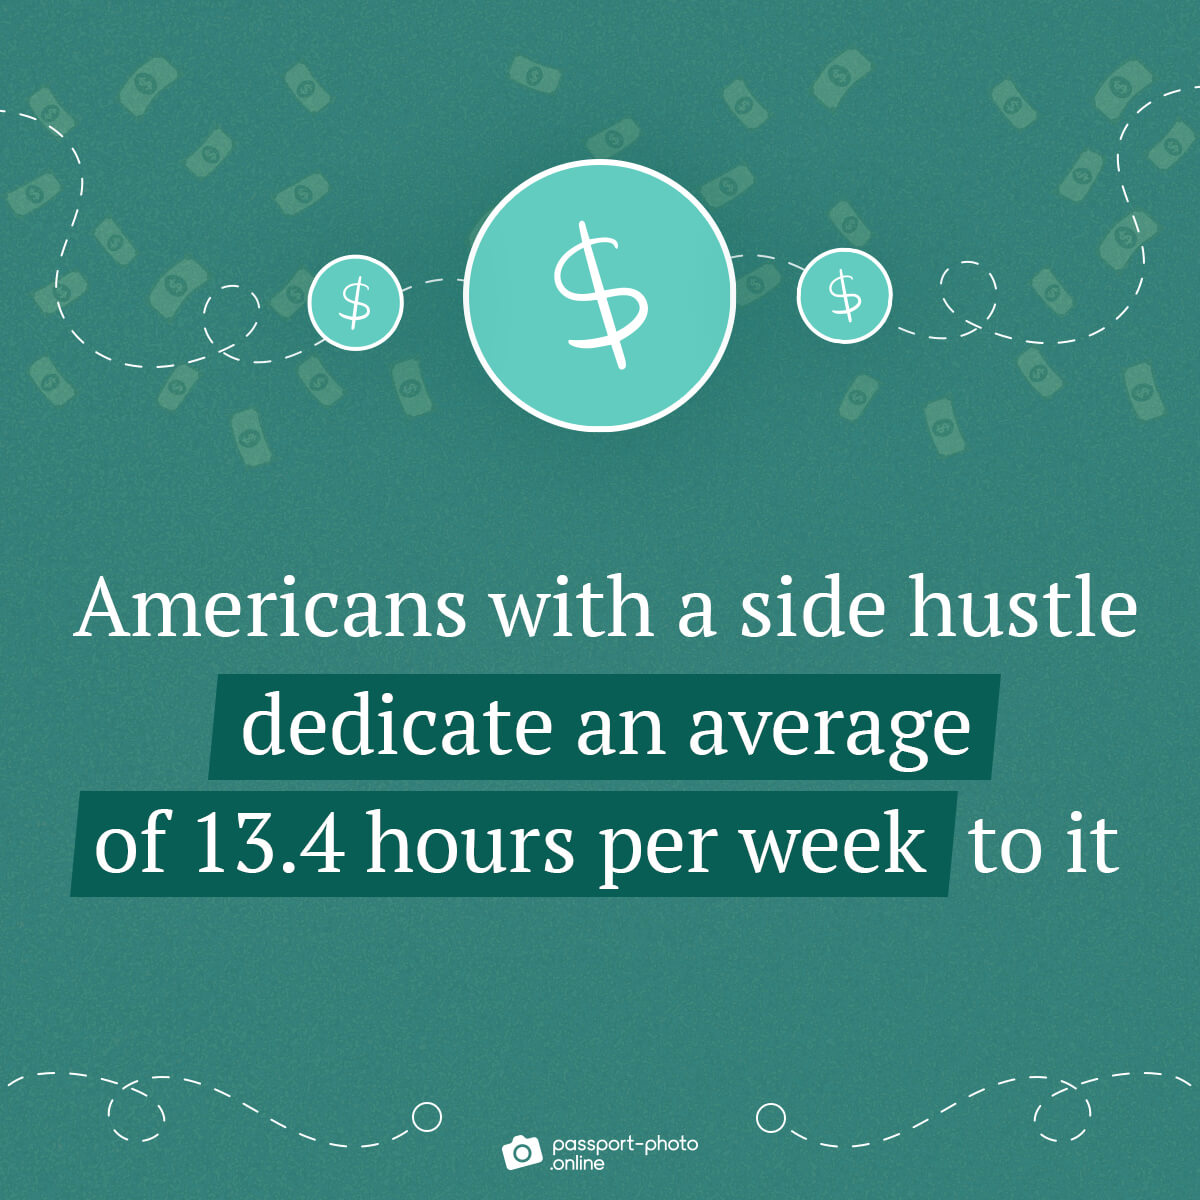 Americans with a side hustle dedicate an average of 13.4 hours per week to it